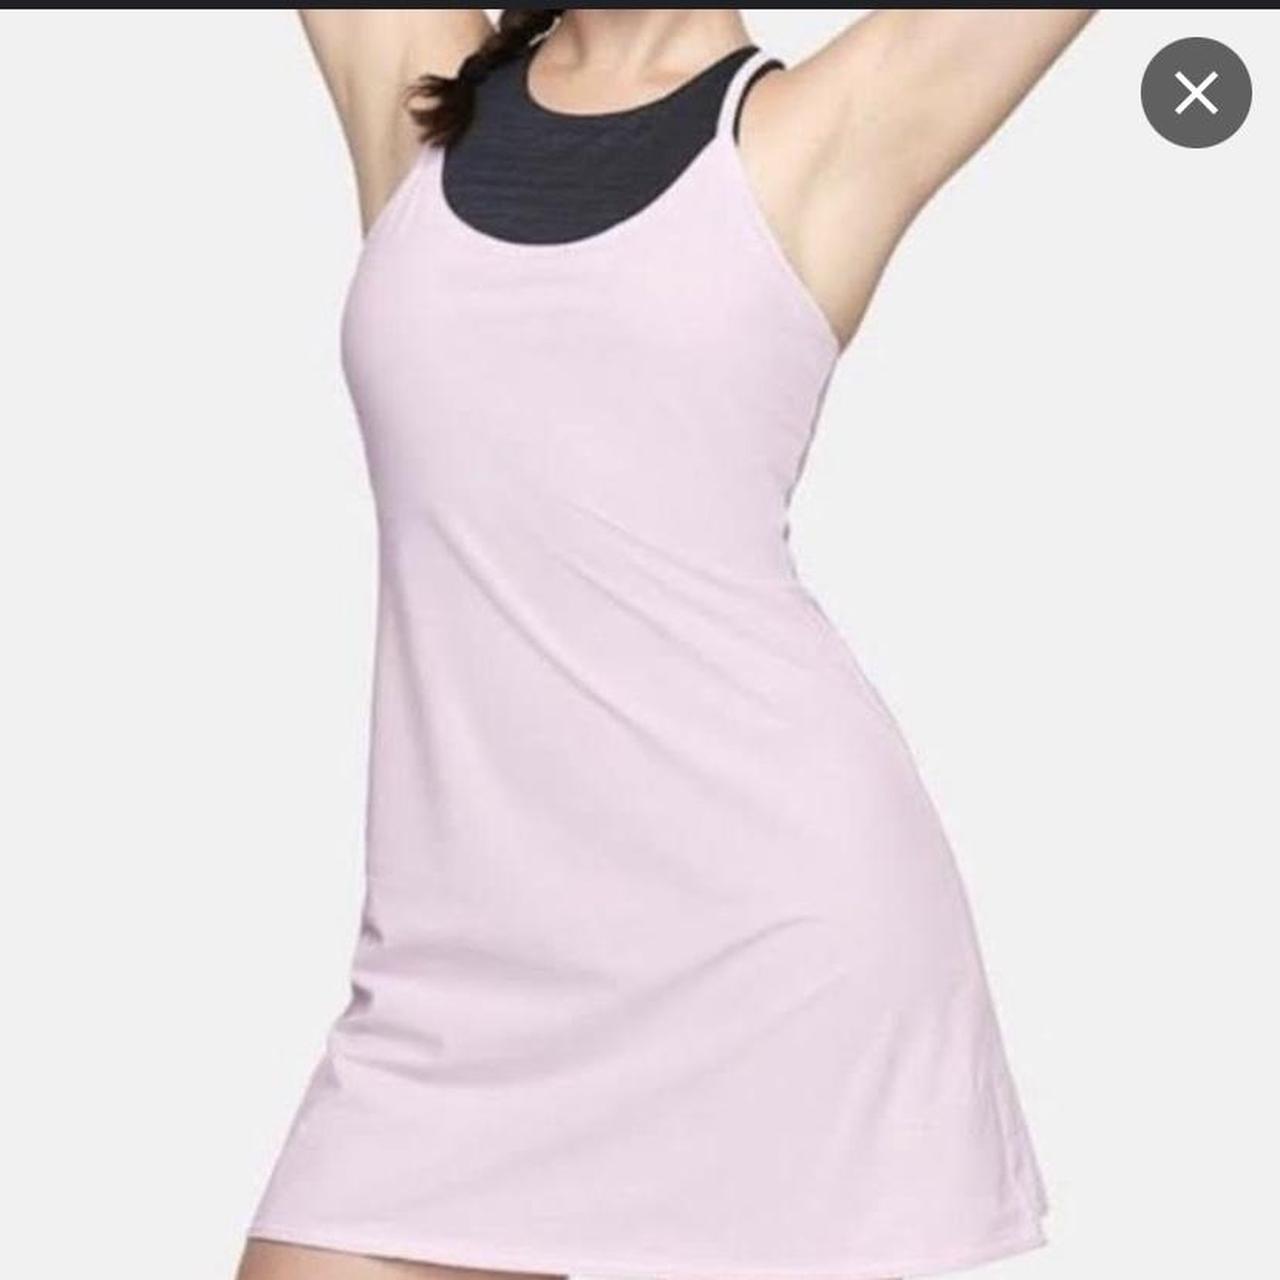 Outdoor Voices Exercise dress size M, light pink *no - Depop